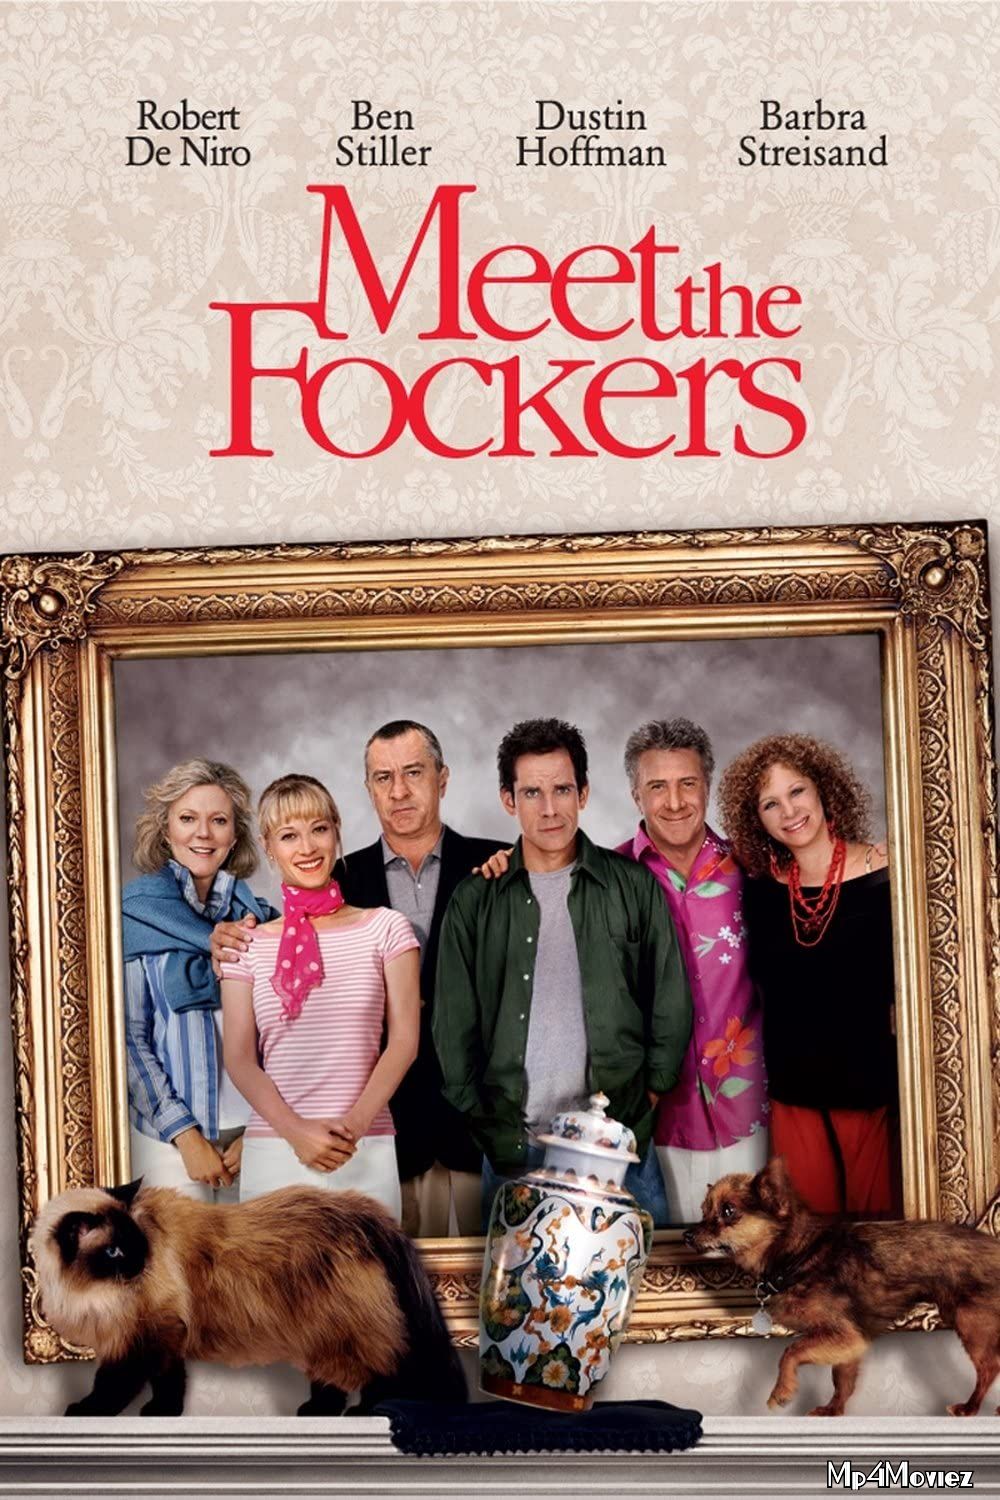 Meet the Fockers (2004) Hindi Dubbed Full Movie download full movie